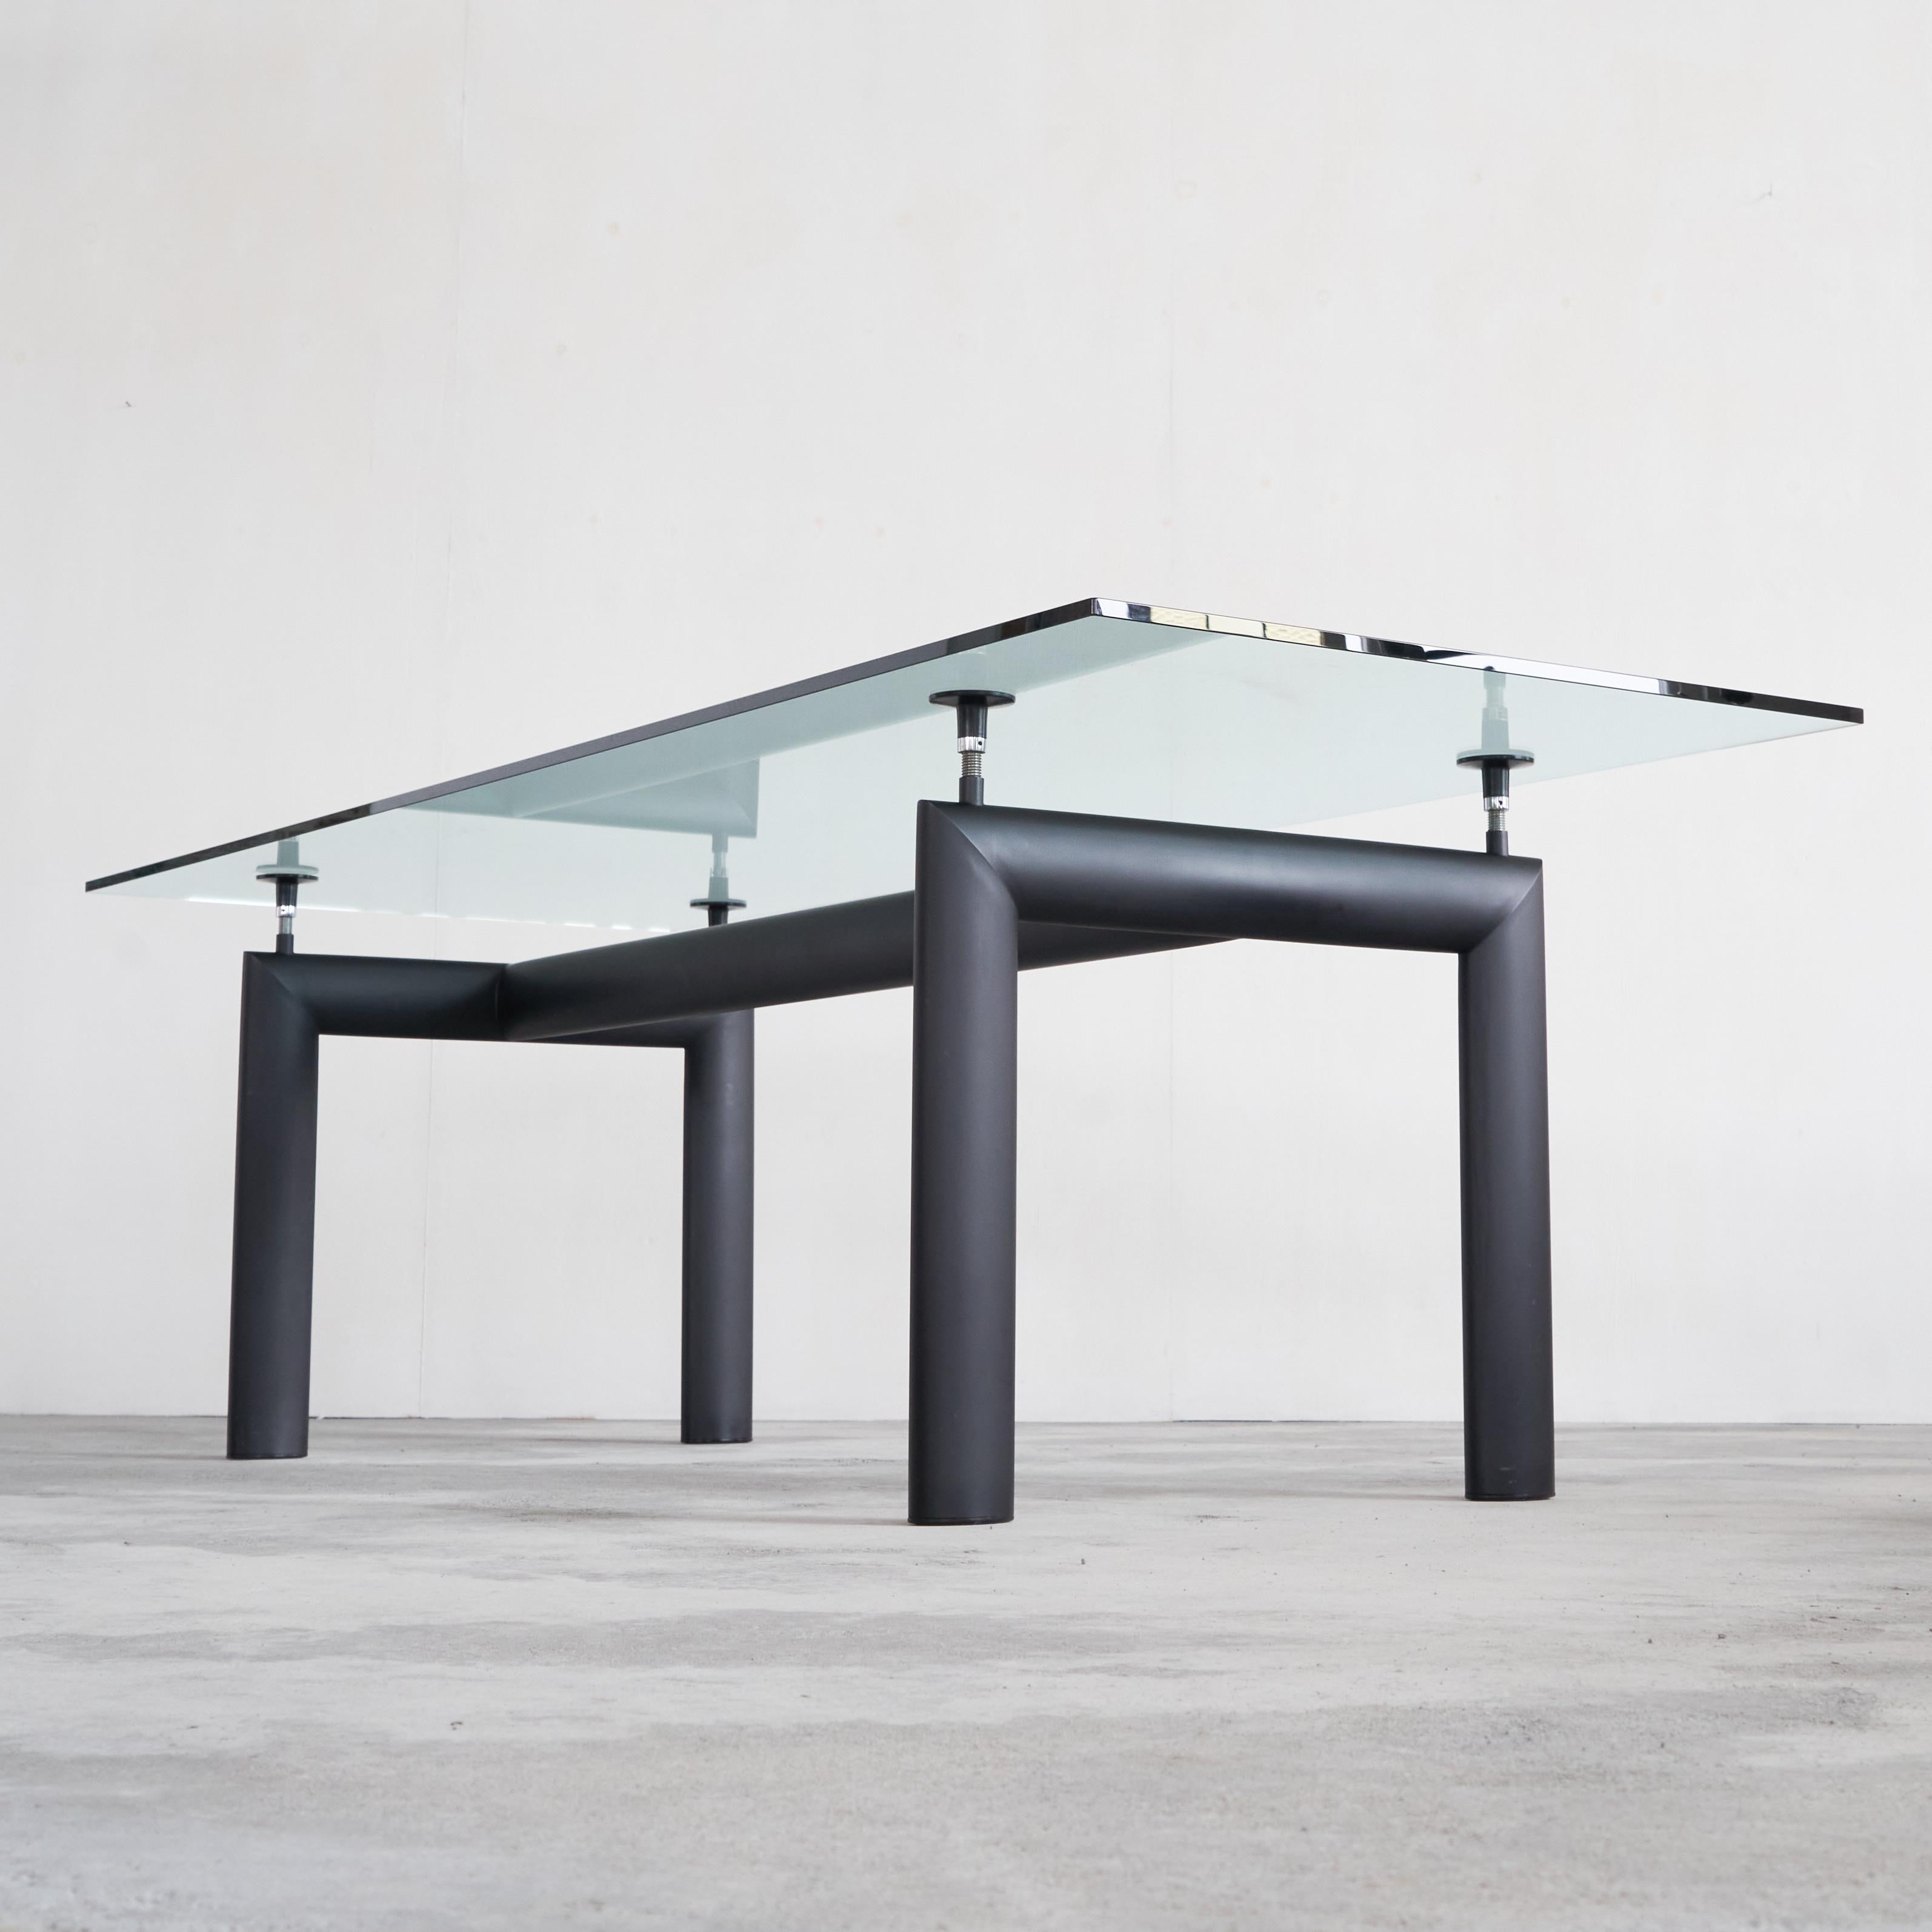 Le Corbusier, Perriand and Jeanneret LC6 'Table Tube D’avion', Cassina edition, Italy, 1990s.

The core concept for the Table tube d’avion table, introduced in 1929 at the Salon d’Automne [Autumn Salon], lies in the distinction between the support